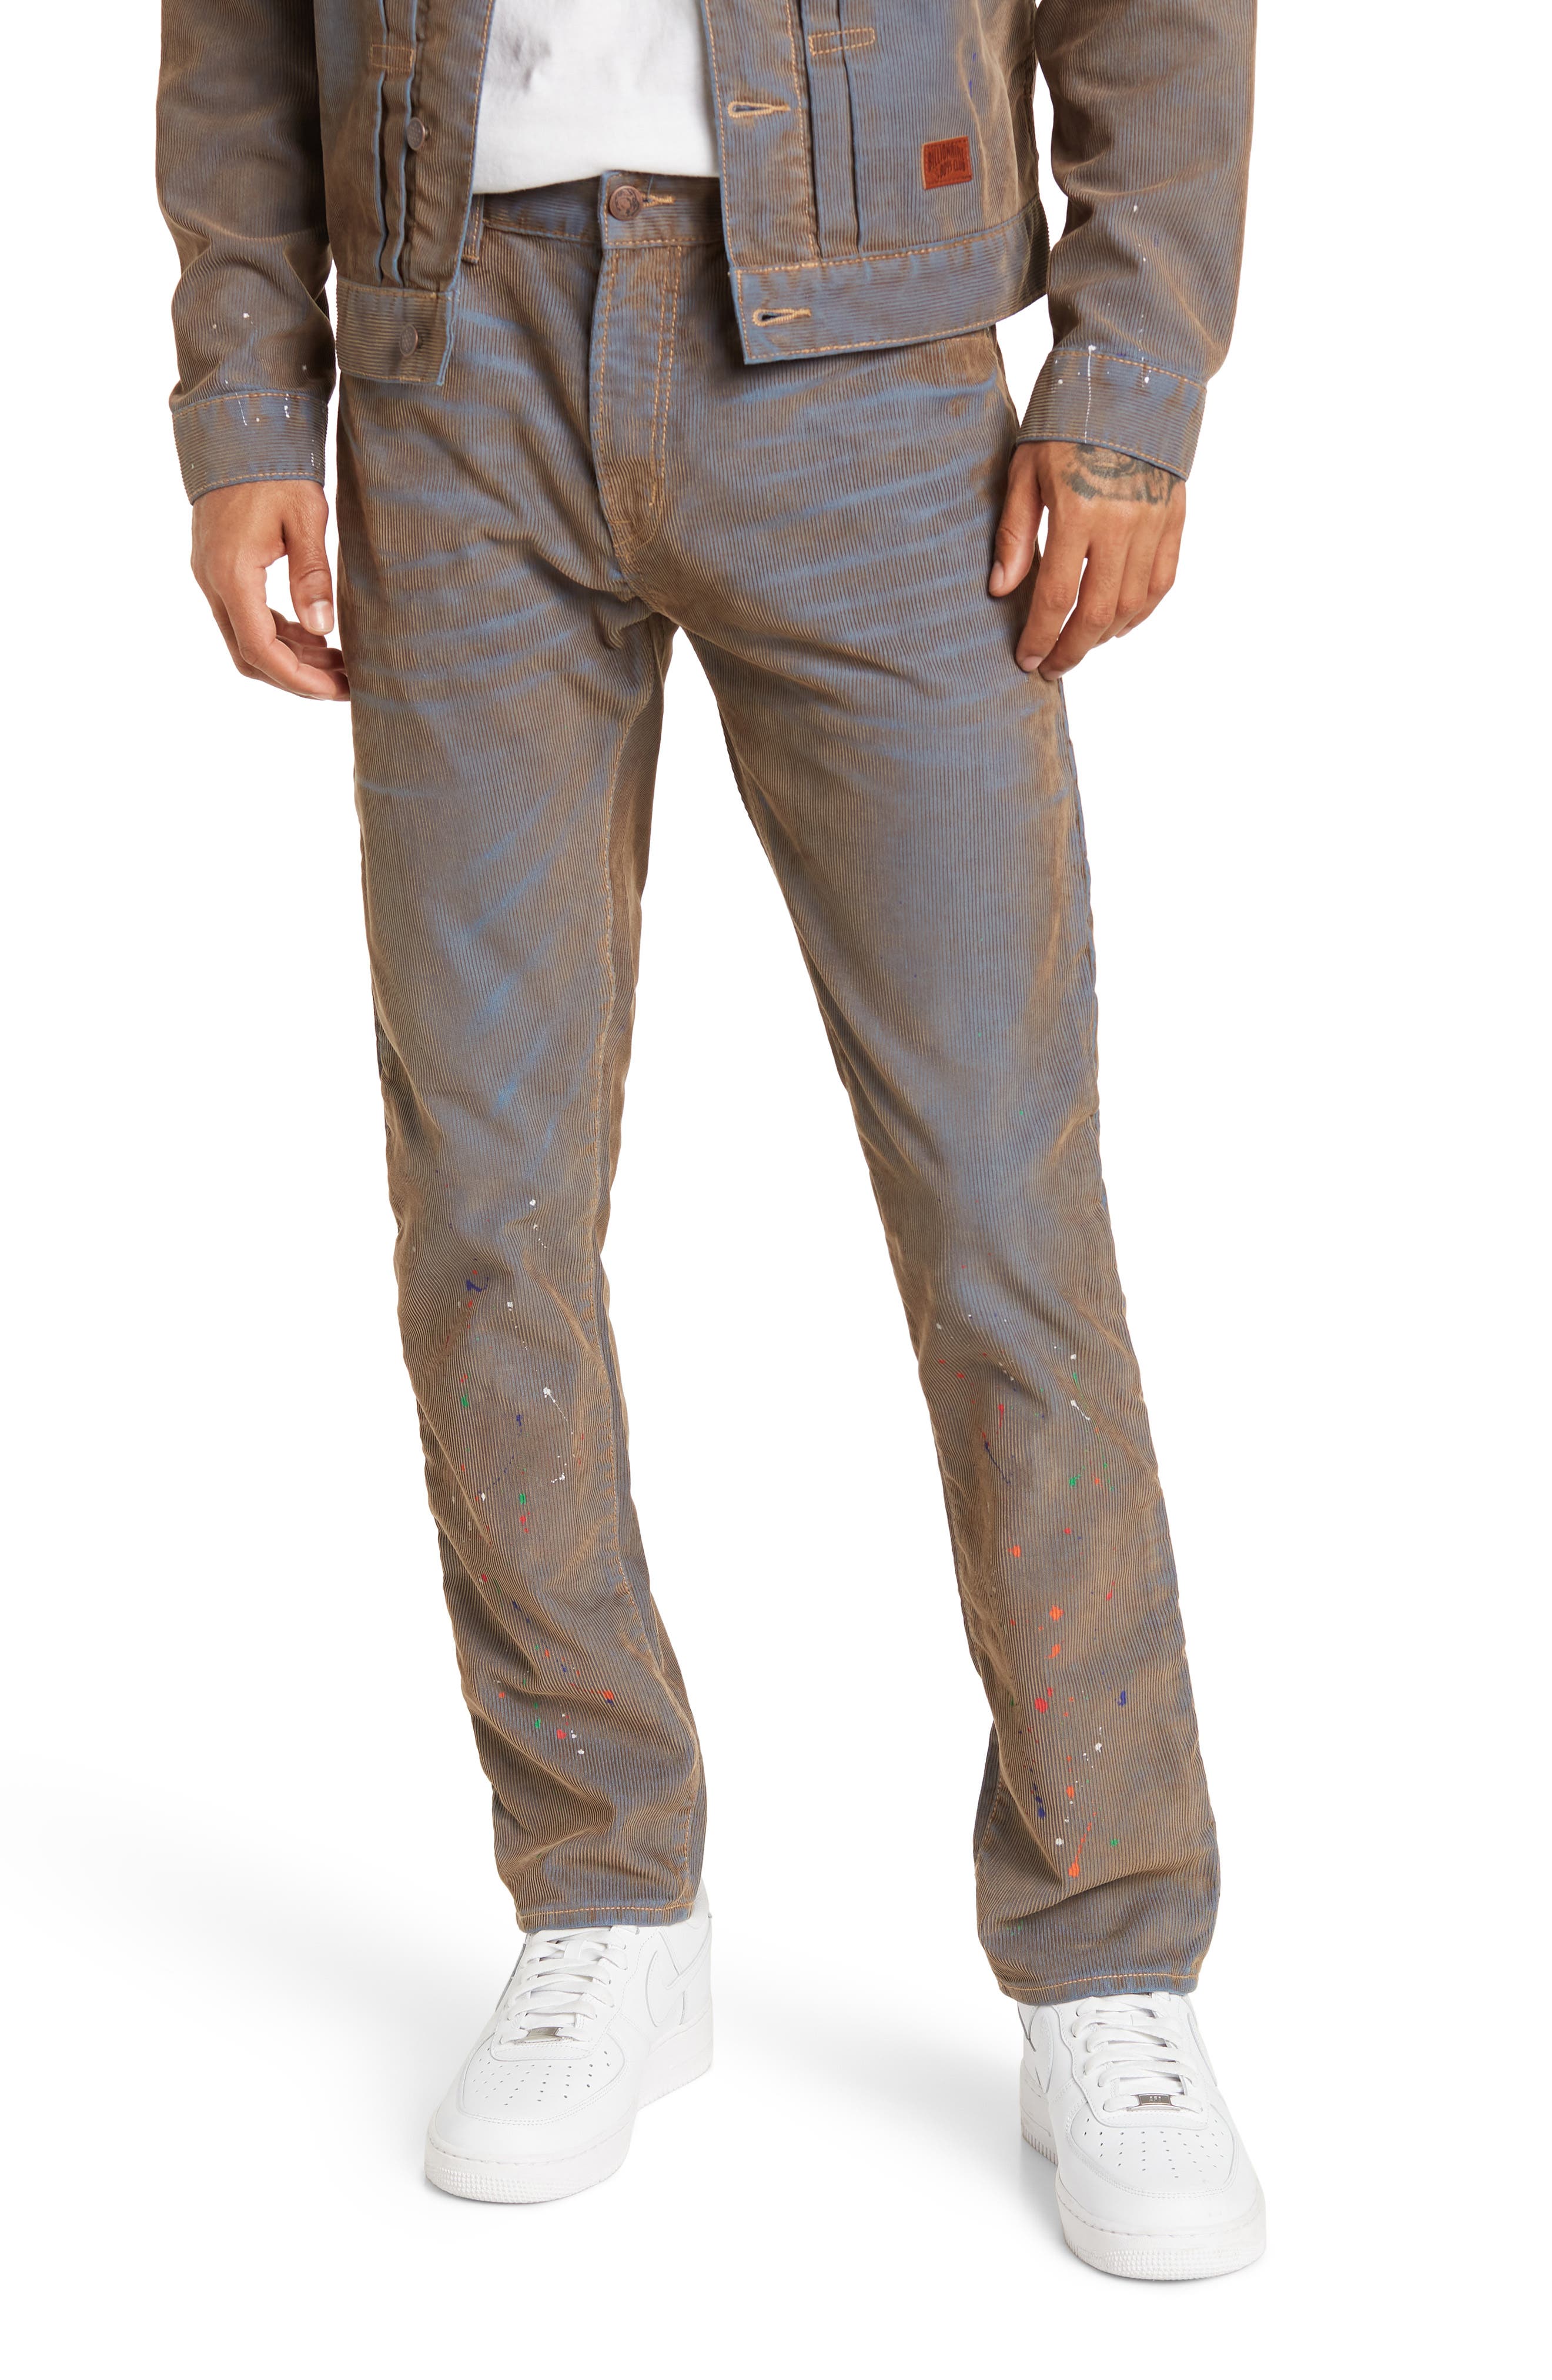 Billionaire Boys Club Expressionist Paint Splatter Corduroy Pants in Saturn's Rings at Nordstrom, Size 32